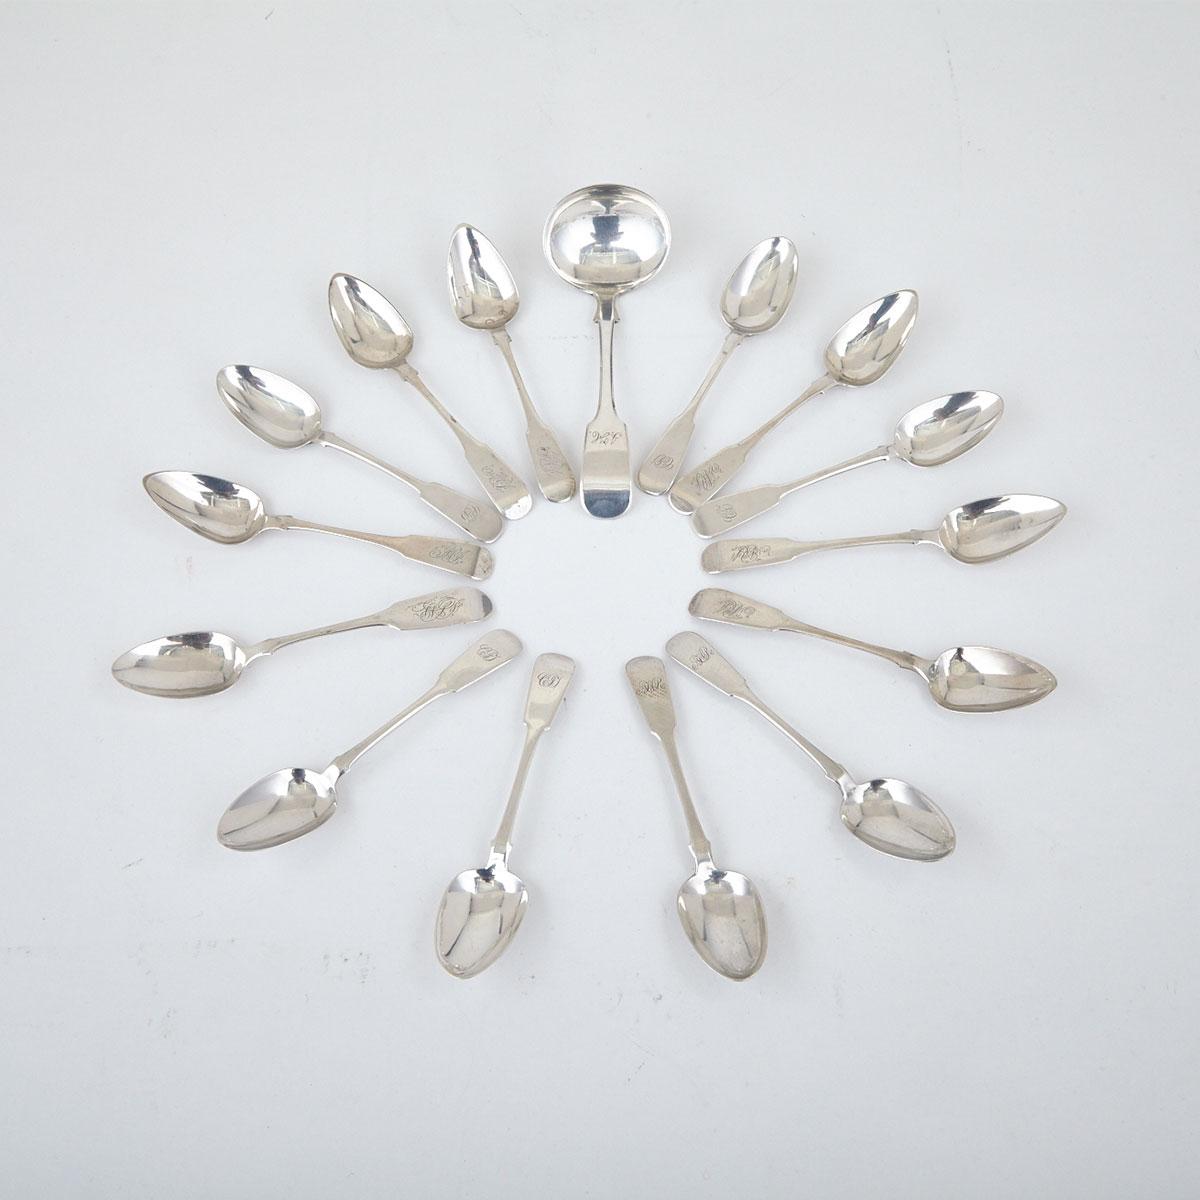 Fourteen Canadian Silver Fiddle Pattern Tea Spoons and a Gravy Ladle, various New Brunswick and Nova Scotia makers, 19th century